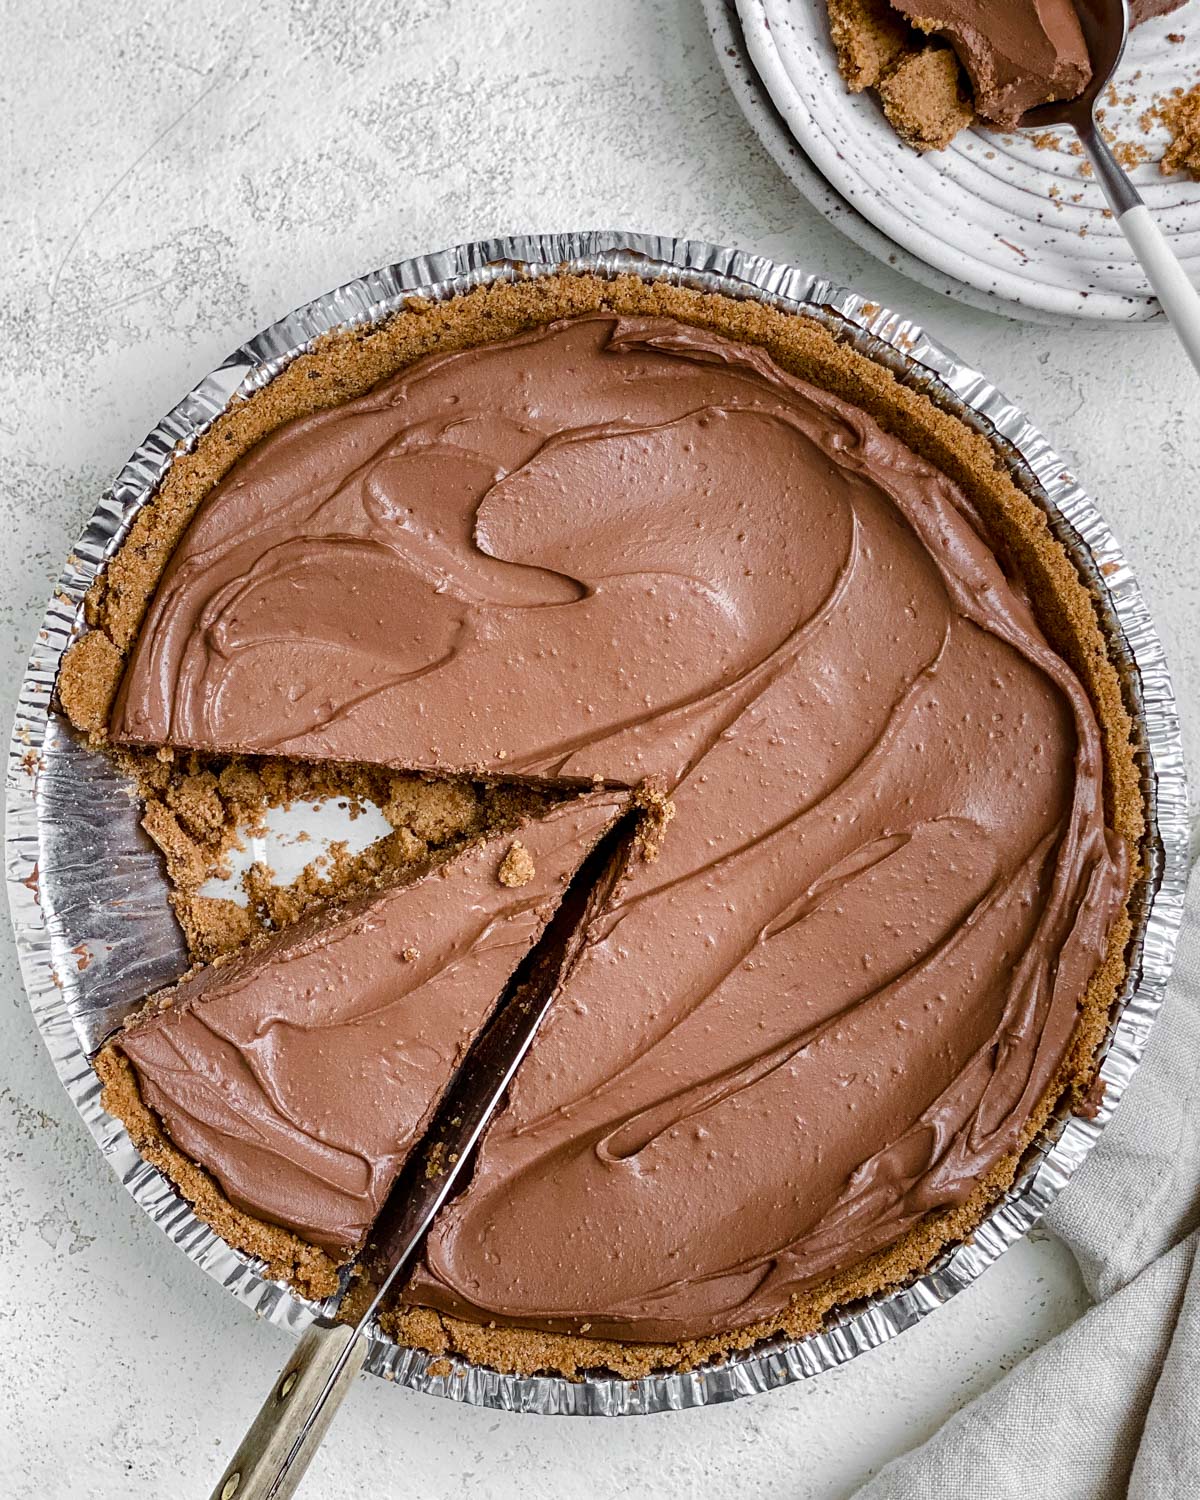 completed Easy Vegan Chocolate Peanut Butter Pie with a slice cut out